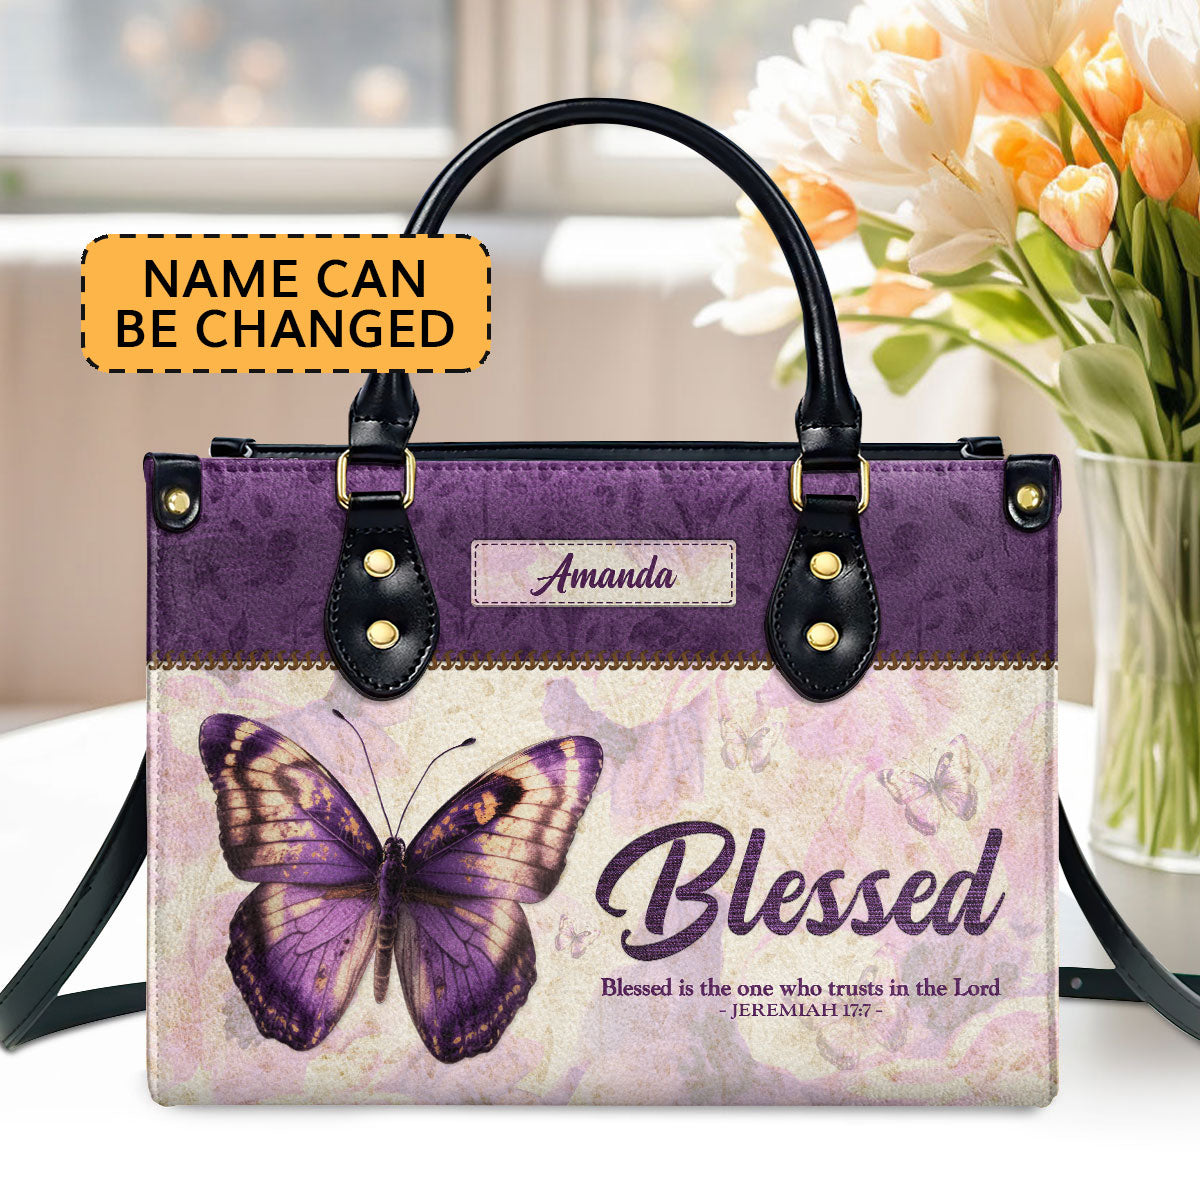 Jesuspirit | Blessed Is The One Who Trusts In The Lord | Jeremiah 17:7 | Personalized Zippered Leather Handbag | Meaningful Gift For Christian Ladies LHBHN801